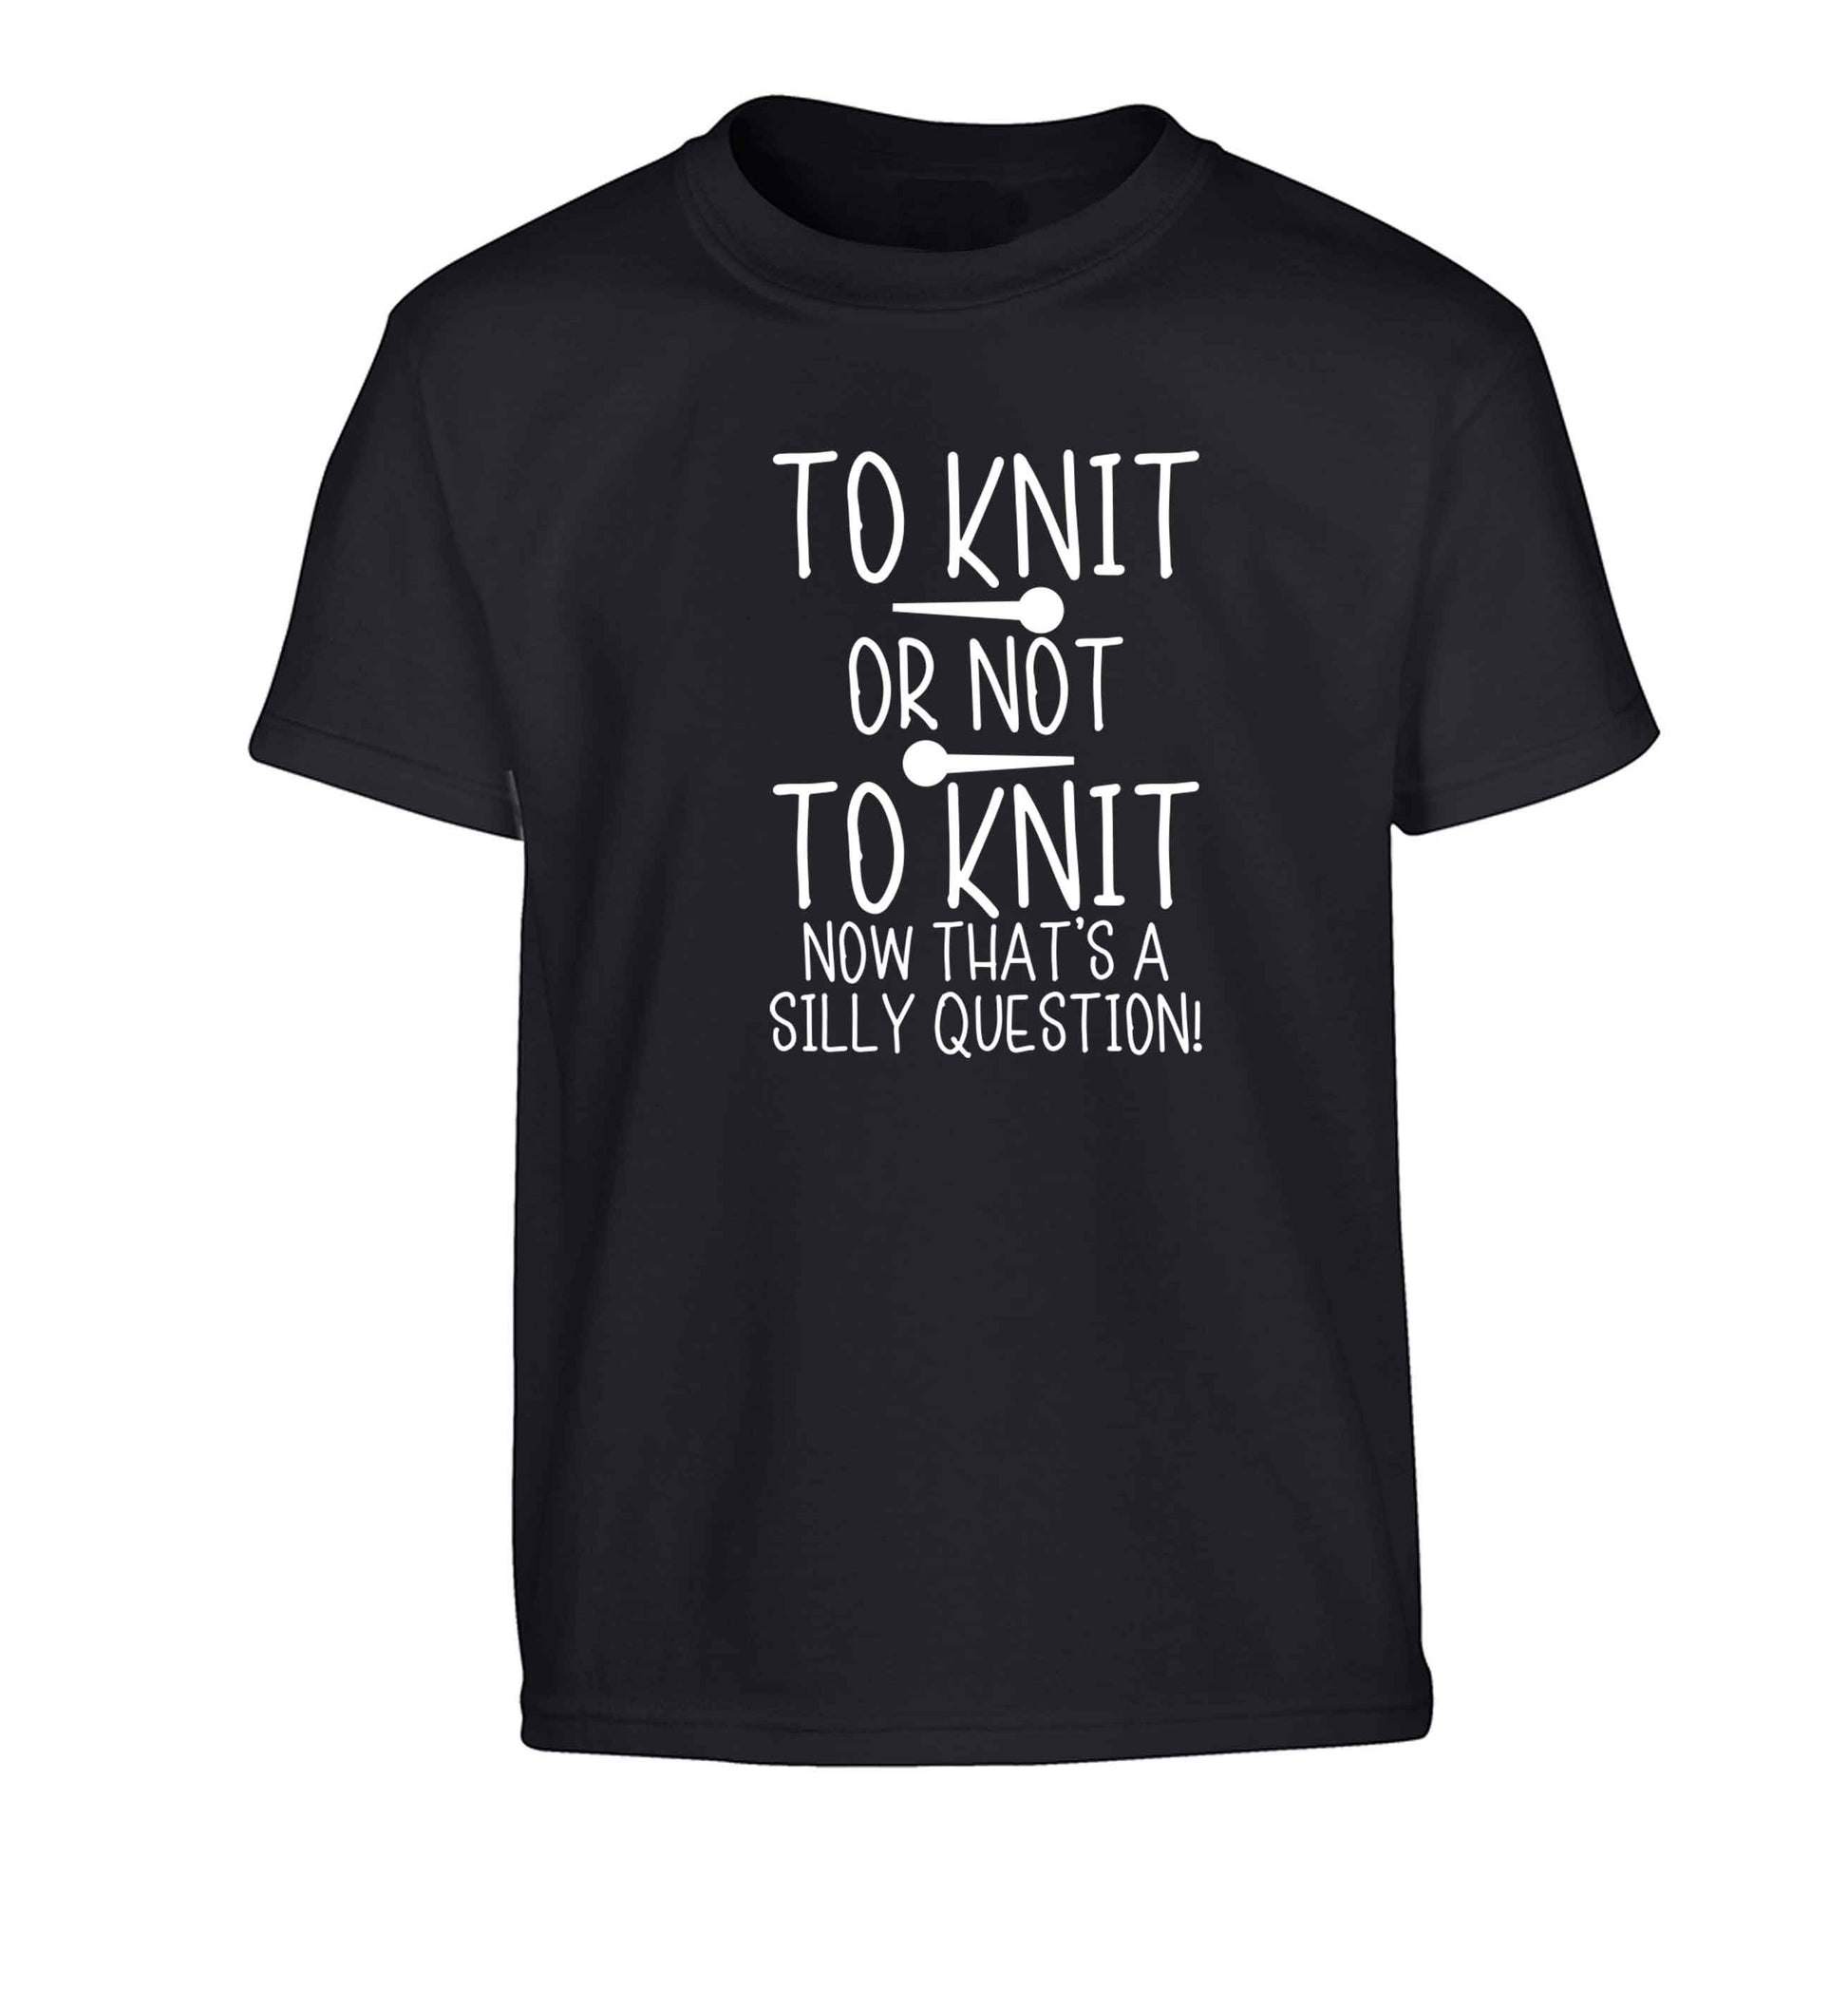 To knit or not to knit now that's a silly question Children's black Tshirt 12-13 Years